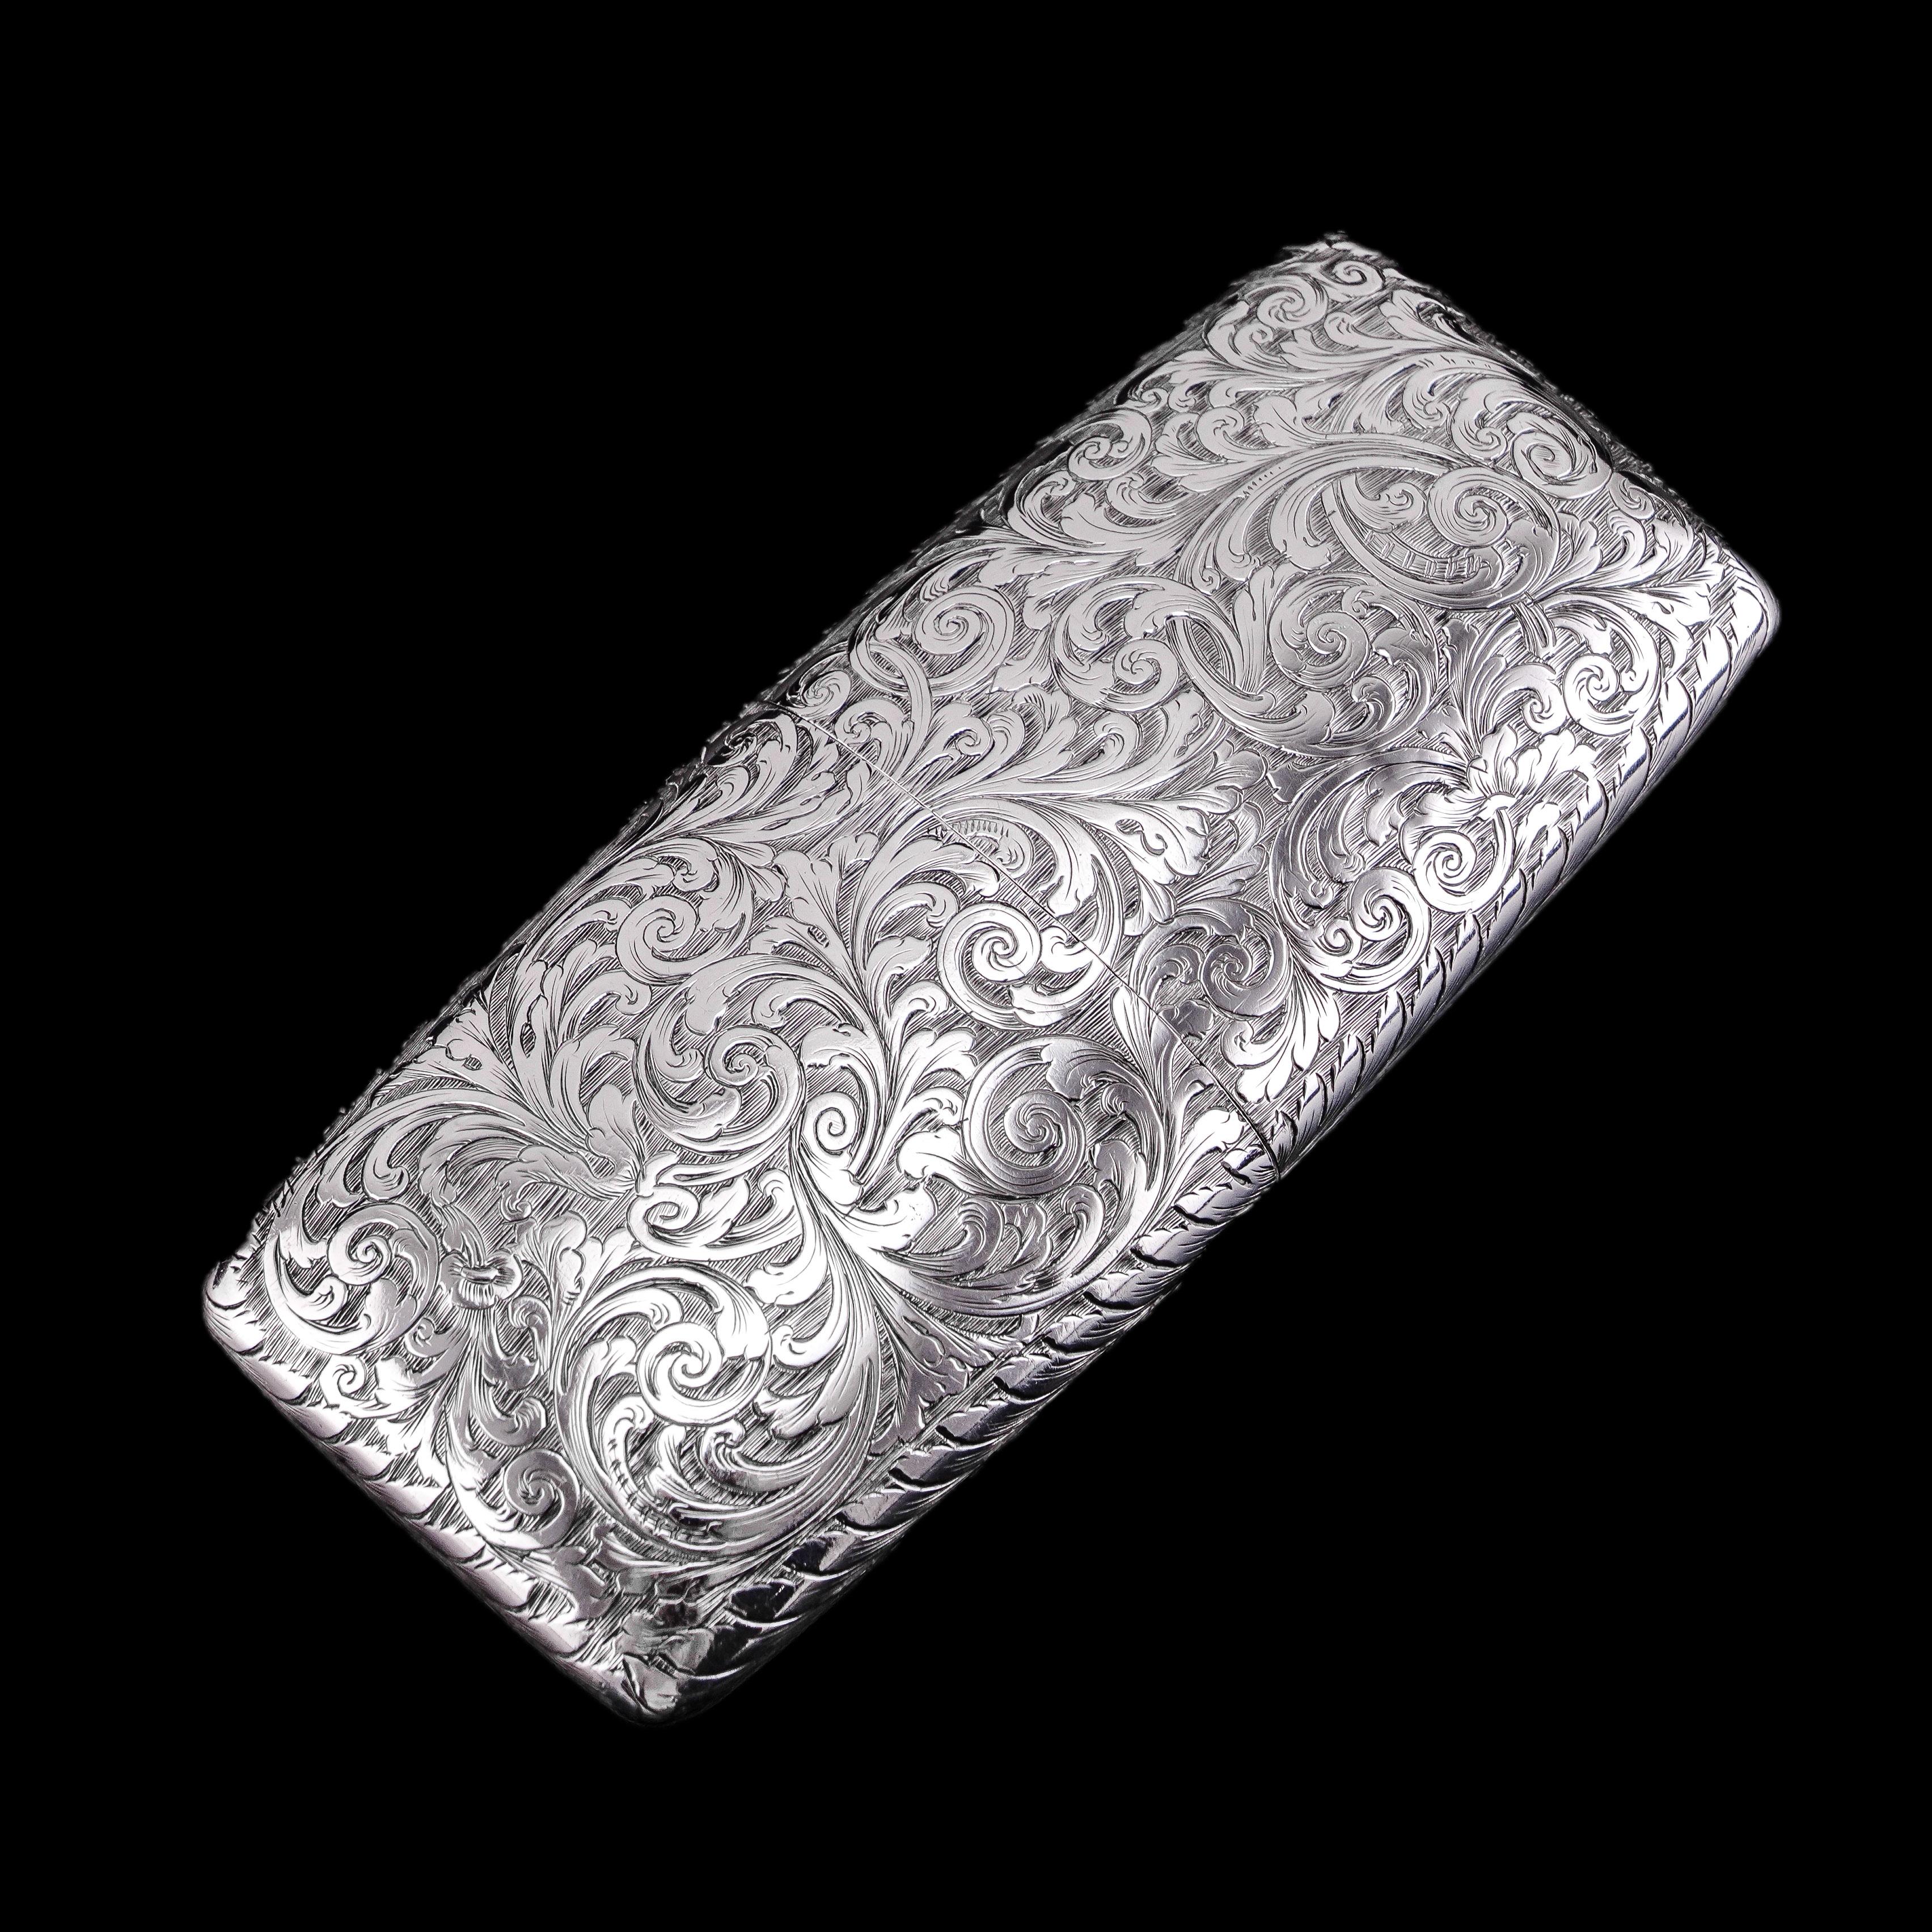 Antique Victorian Solid Sterling Silver Cigar Cheroot Case -Nathaniel Mills 1841 7